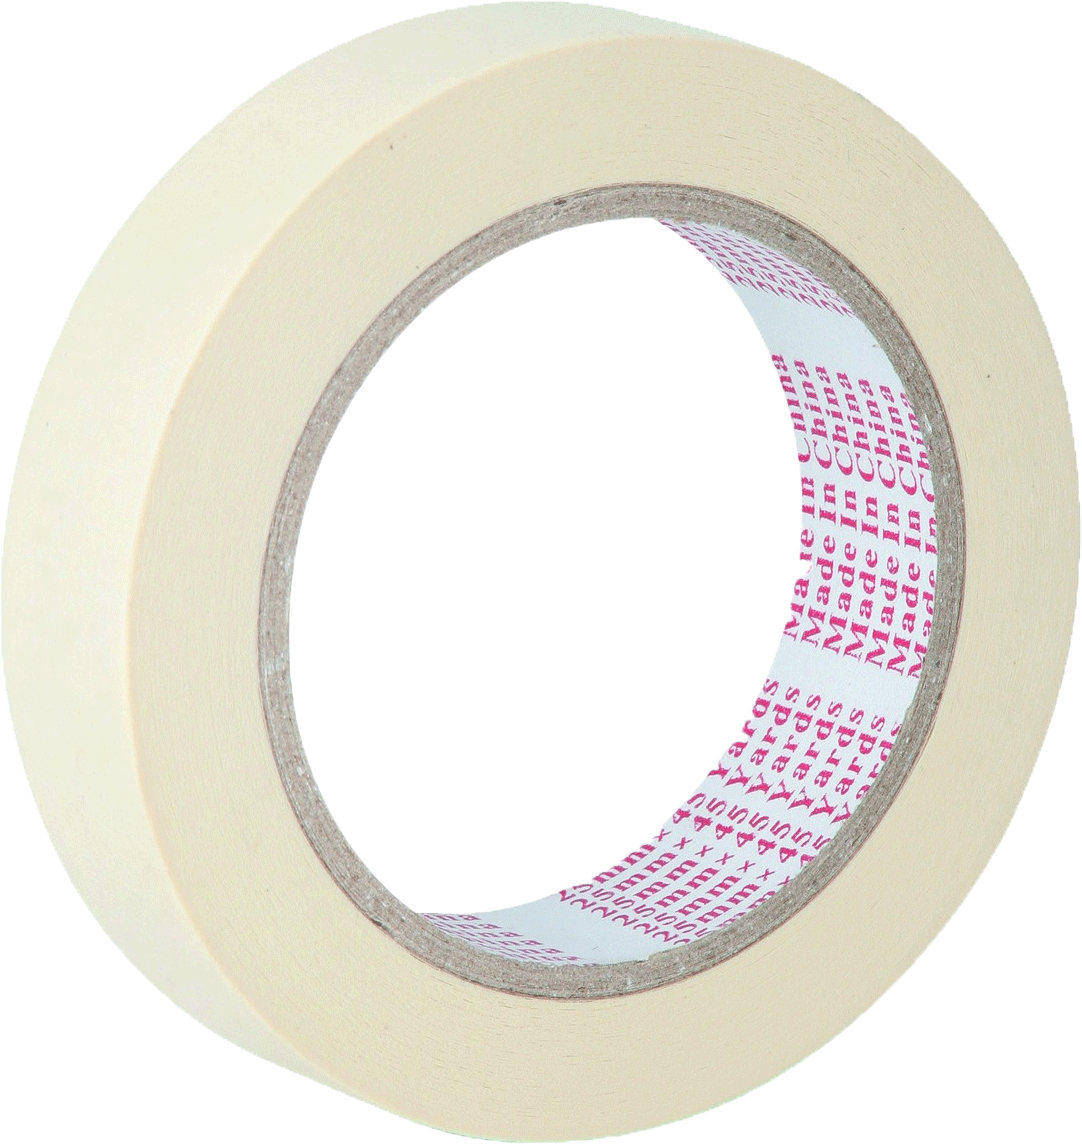 Colored Masking Tape - 1 x 60 yds, Assorted, Pkg of 8